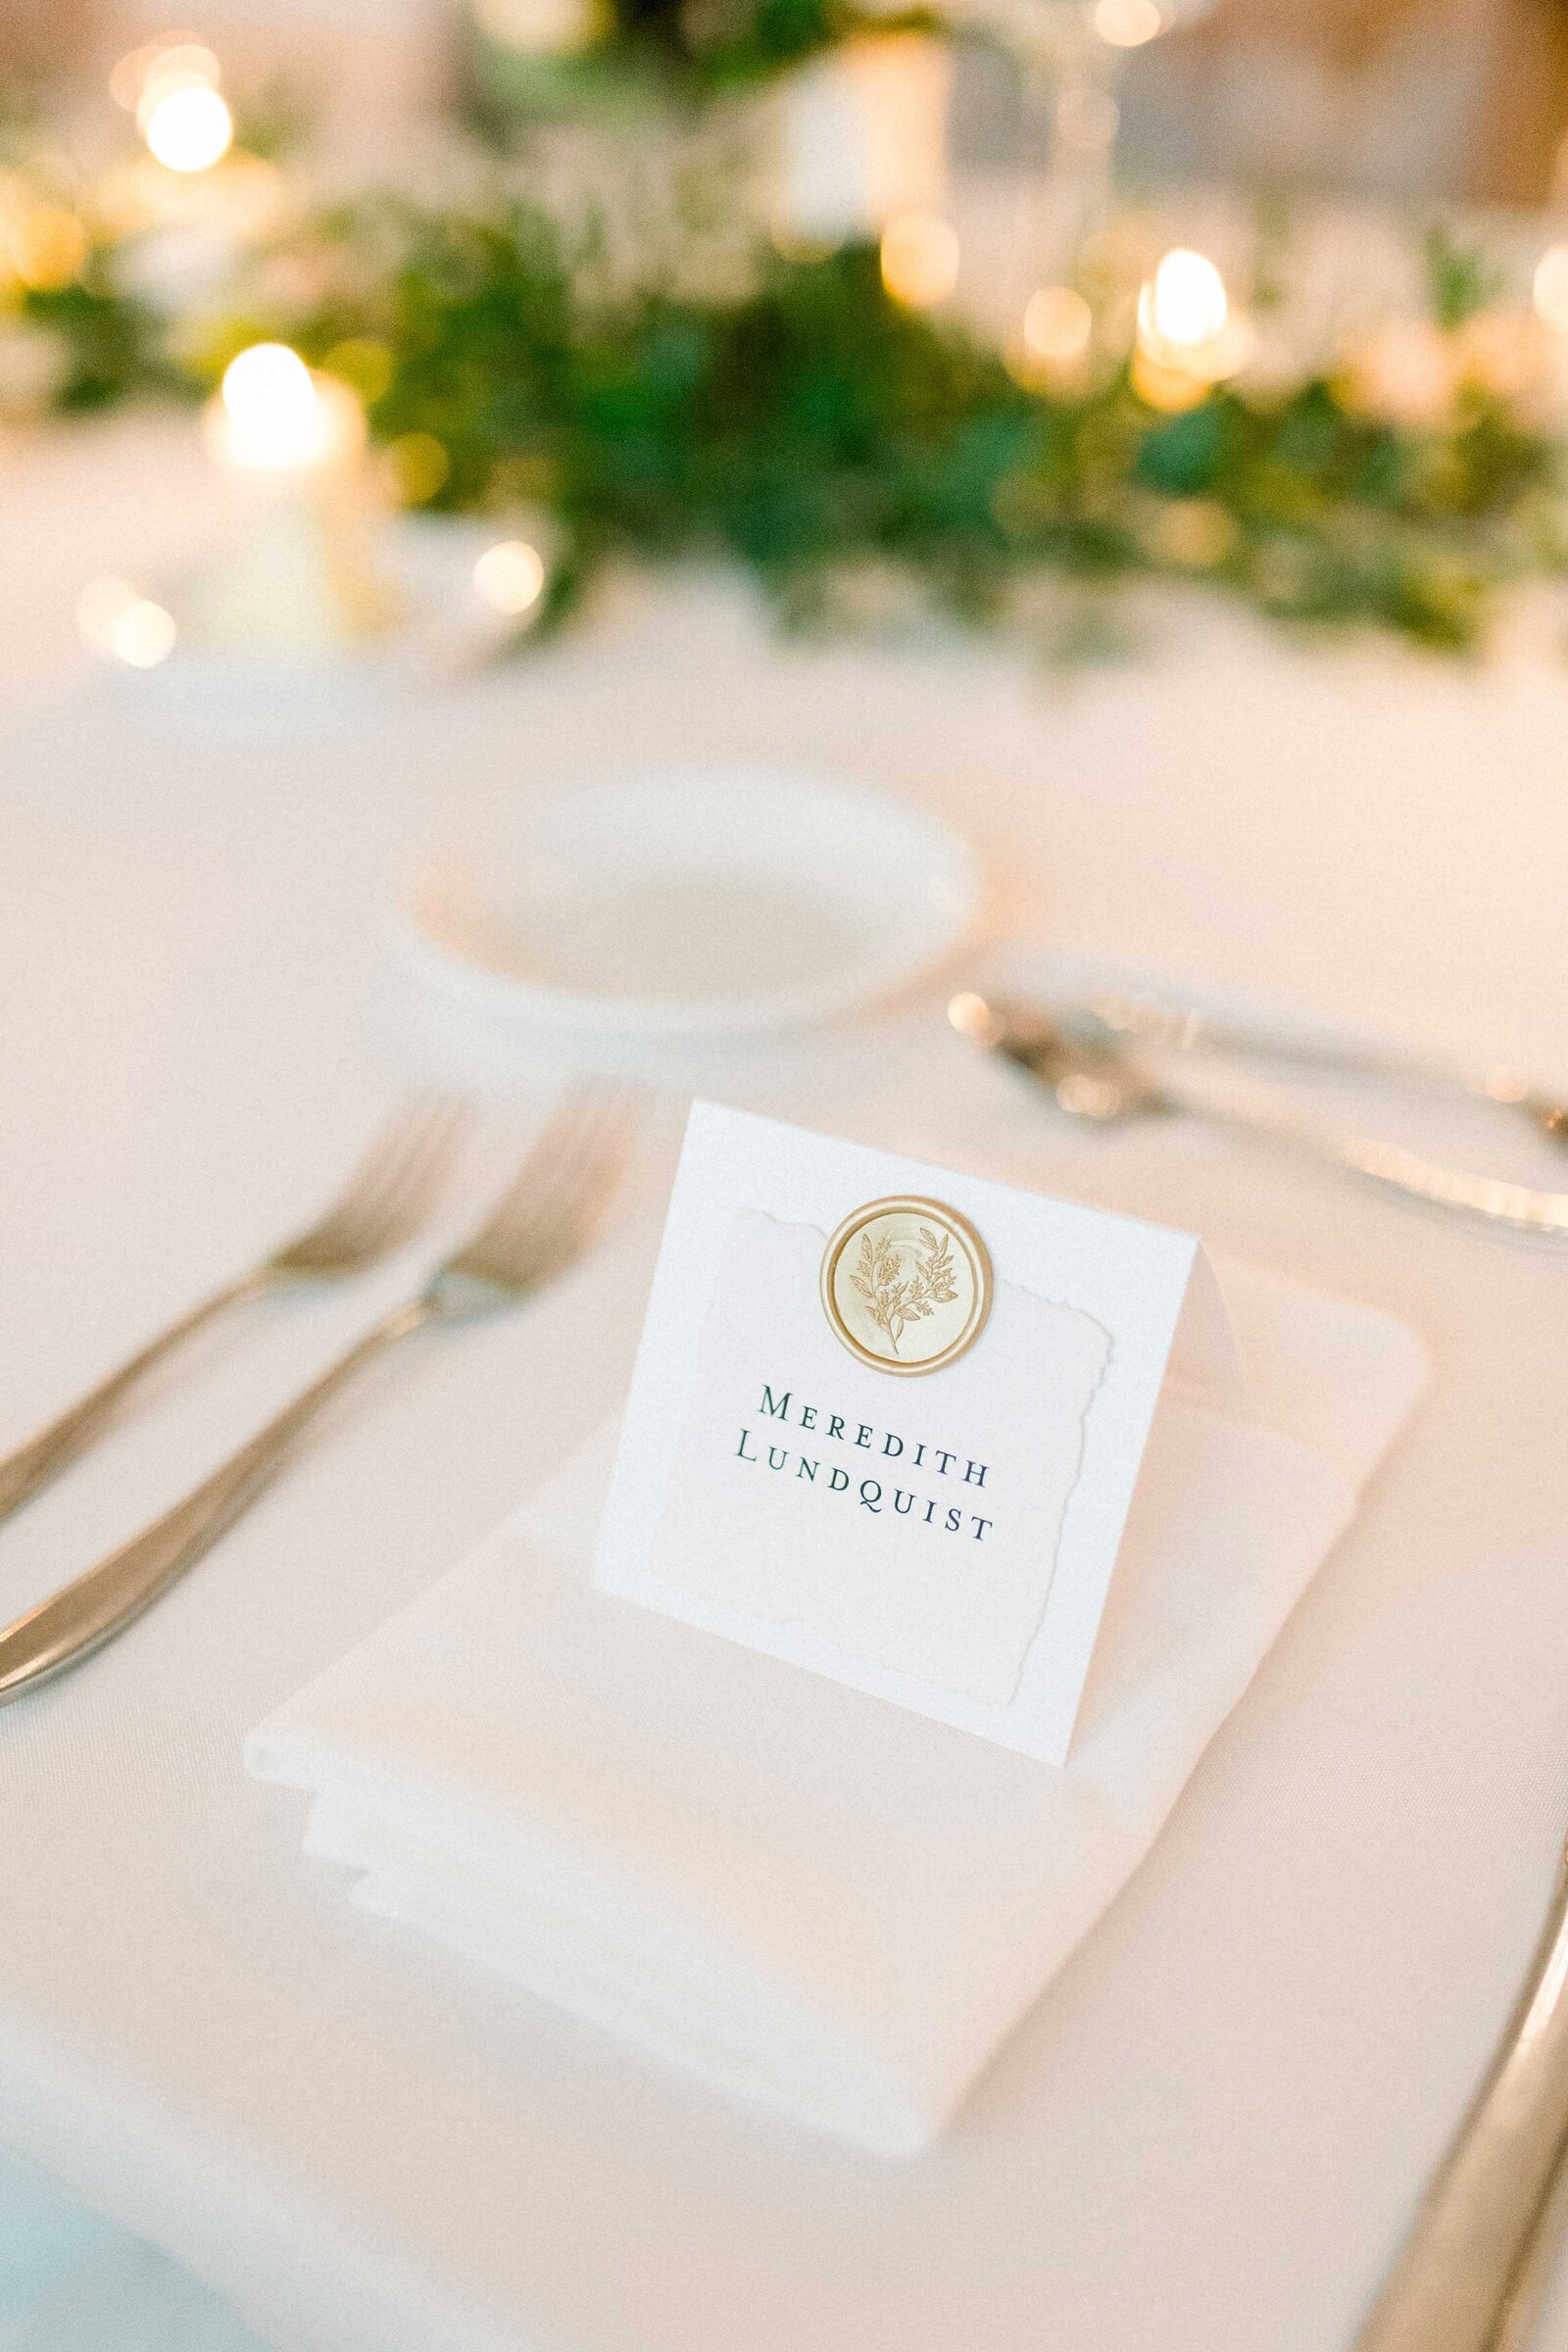 northern-vine-design-reception-placecard-with-wax-seal